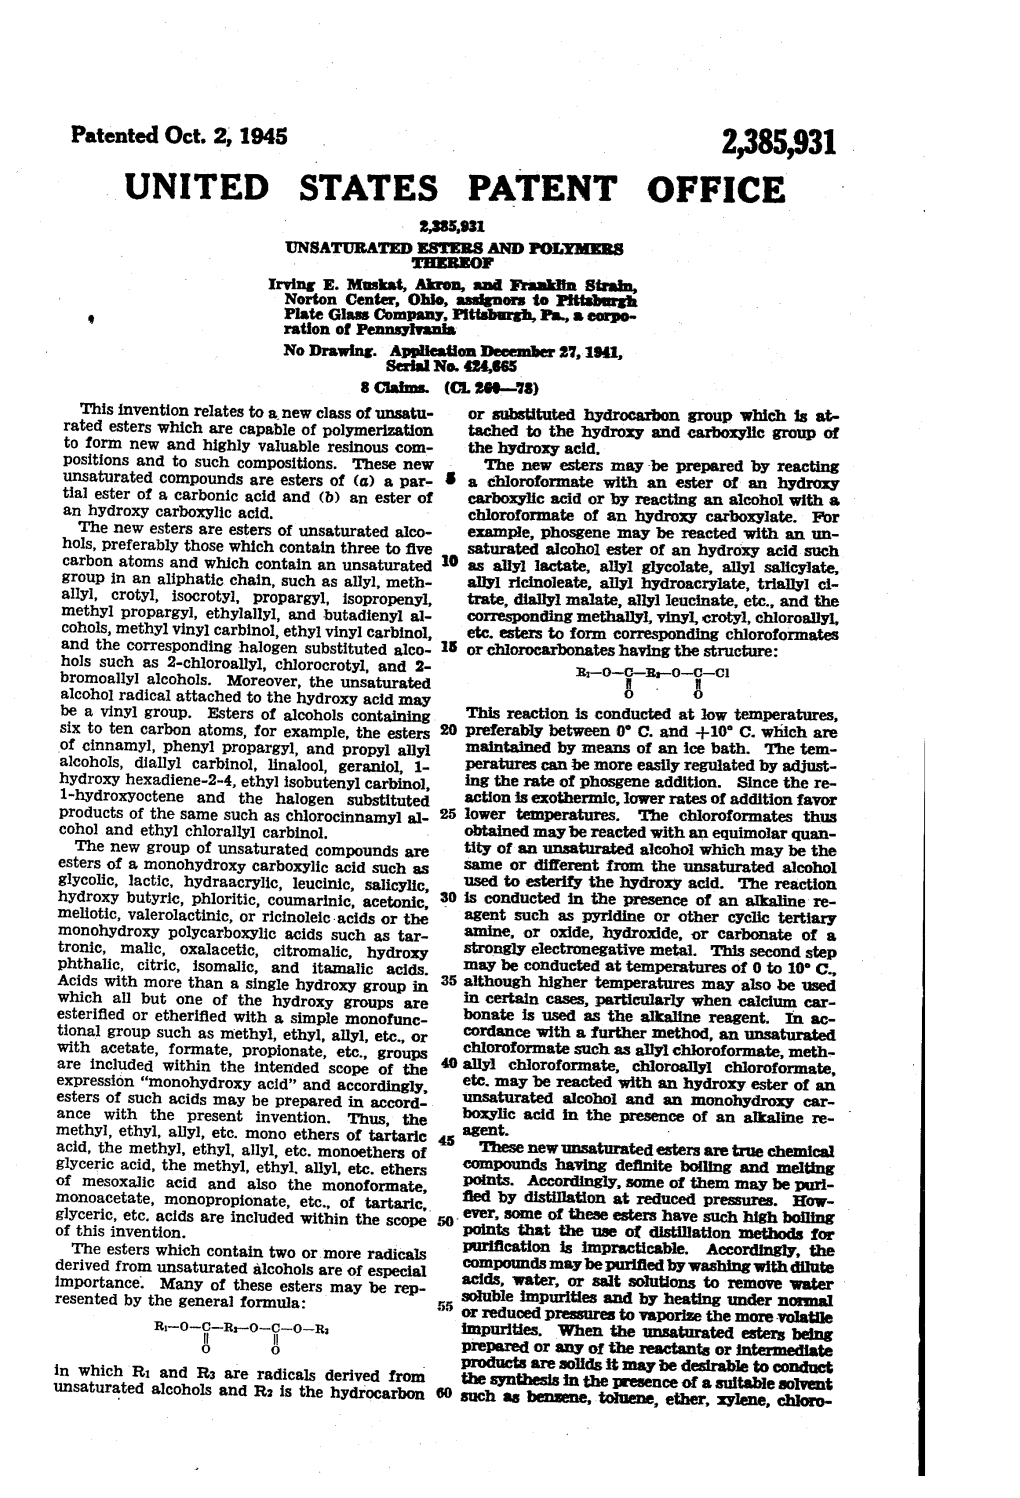 UNITED STATES PATENT OFFICE 2,385.93 UNSATURATED ESTERS and POYMERS REO Irving E